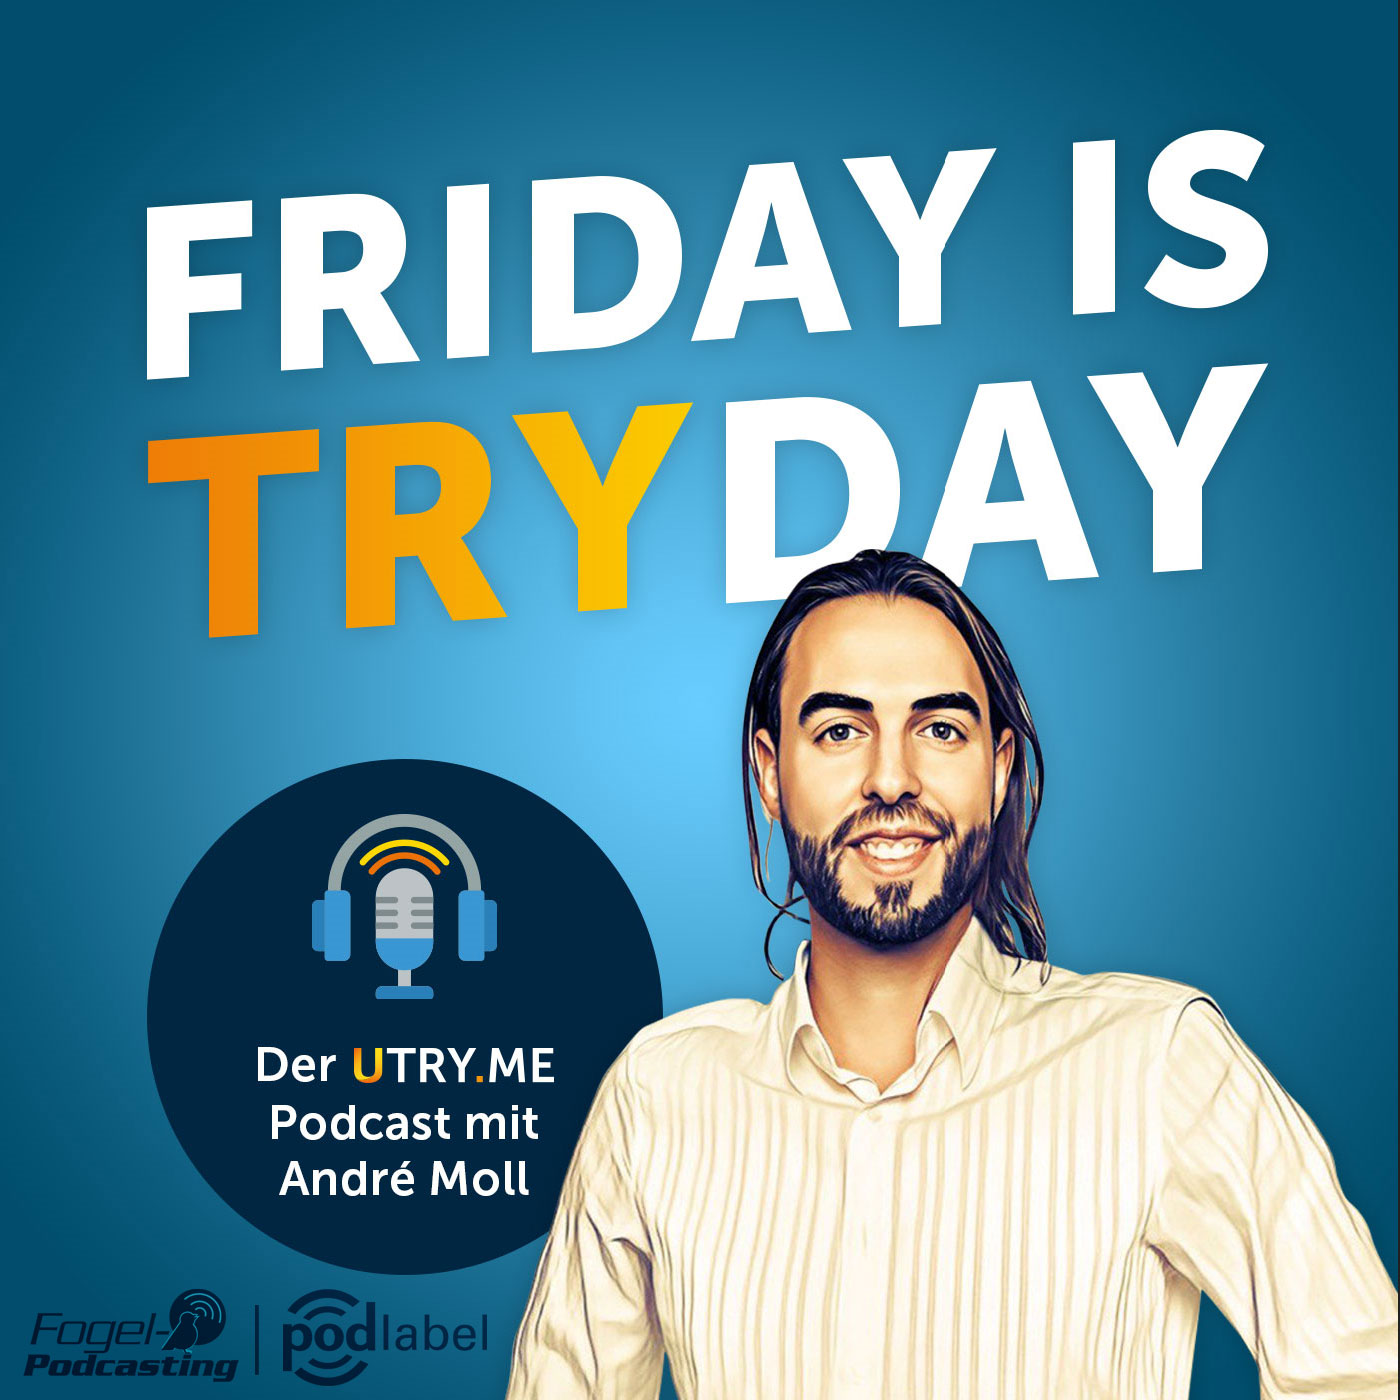 Vorgestellt: FRIDAY IS TRYDAY – Der UTRY.ME Podcast mit André Moll